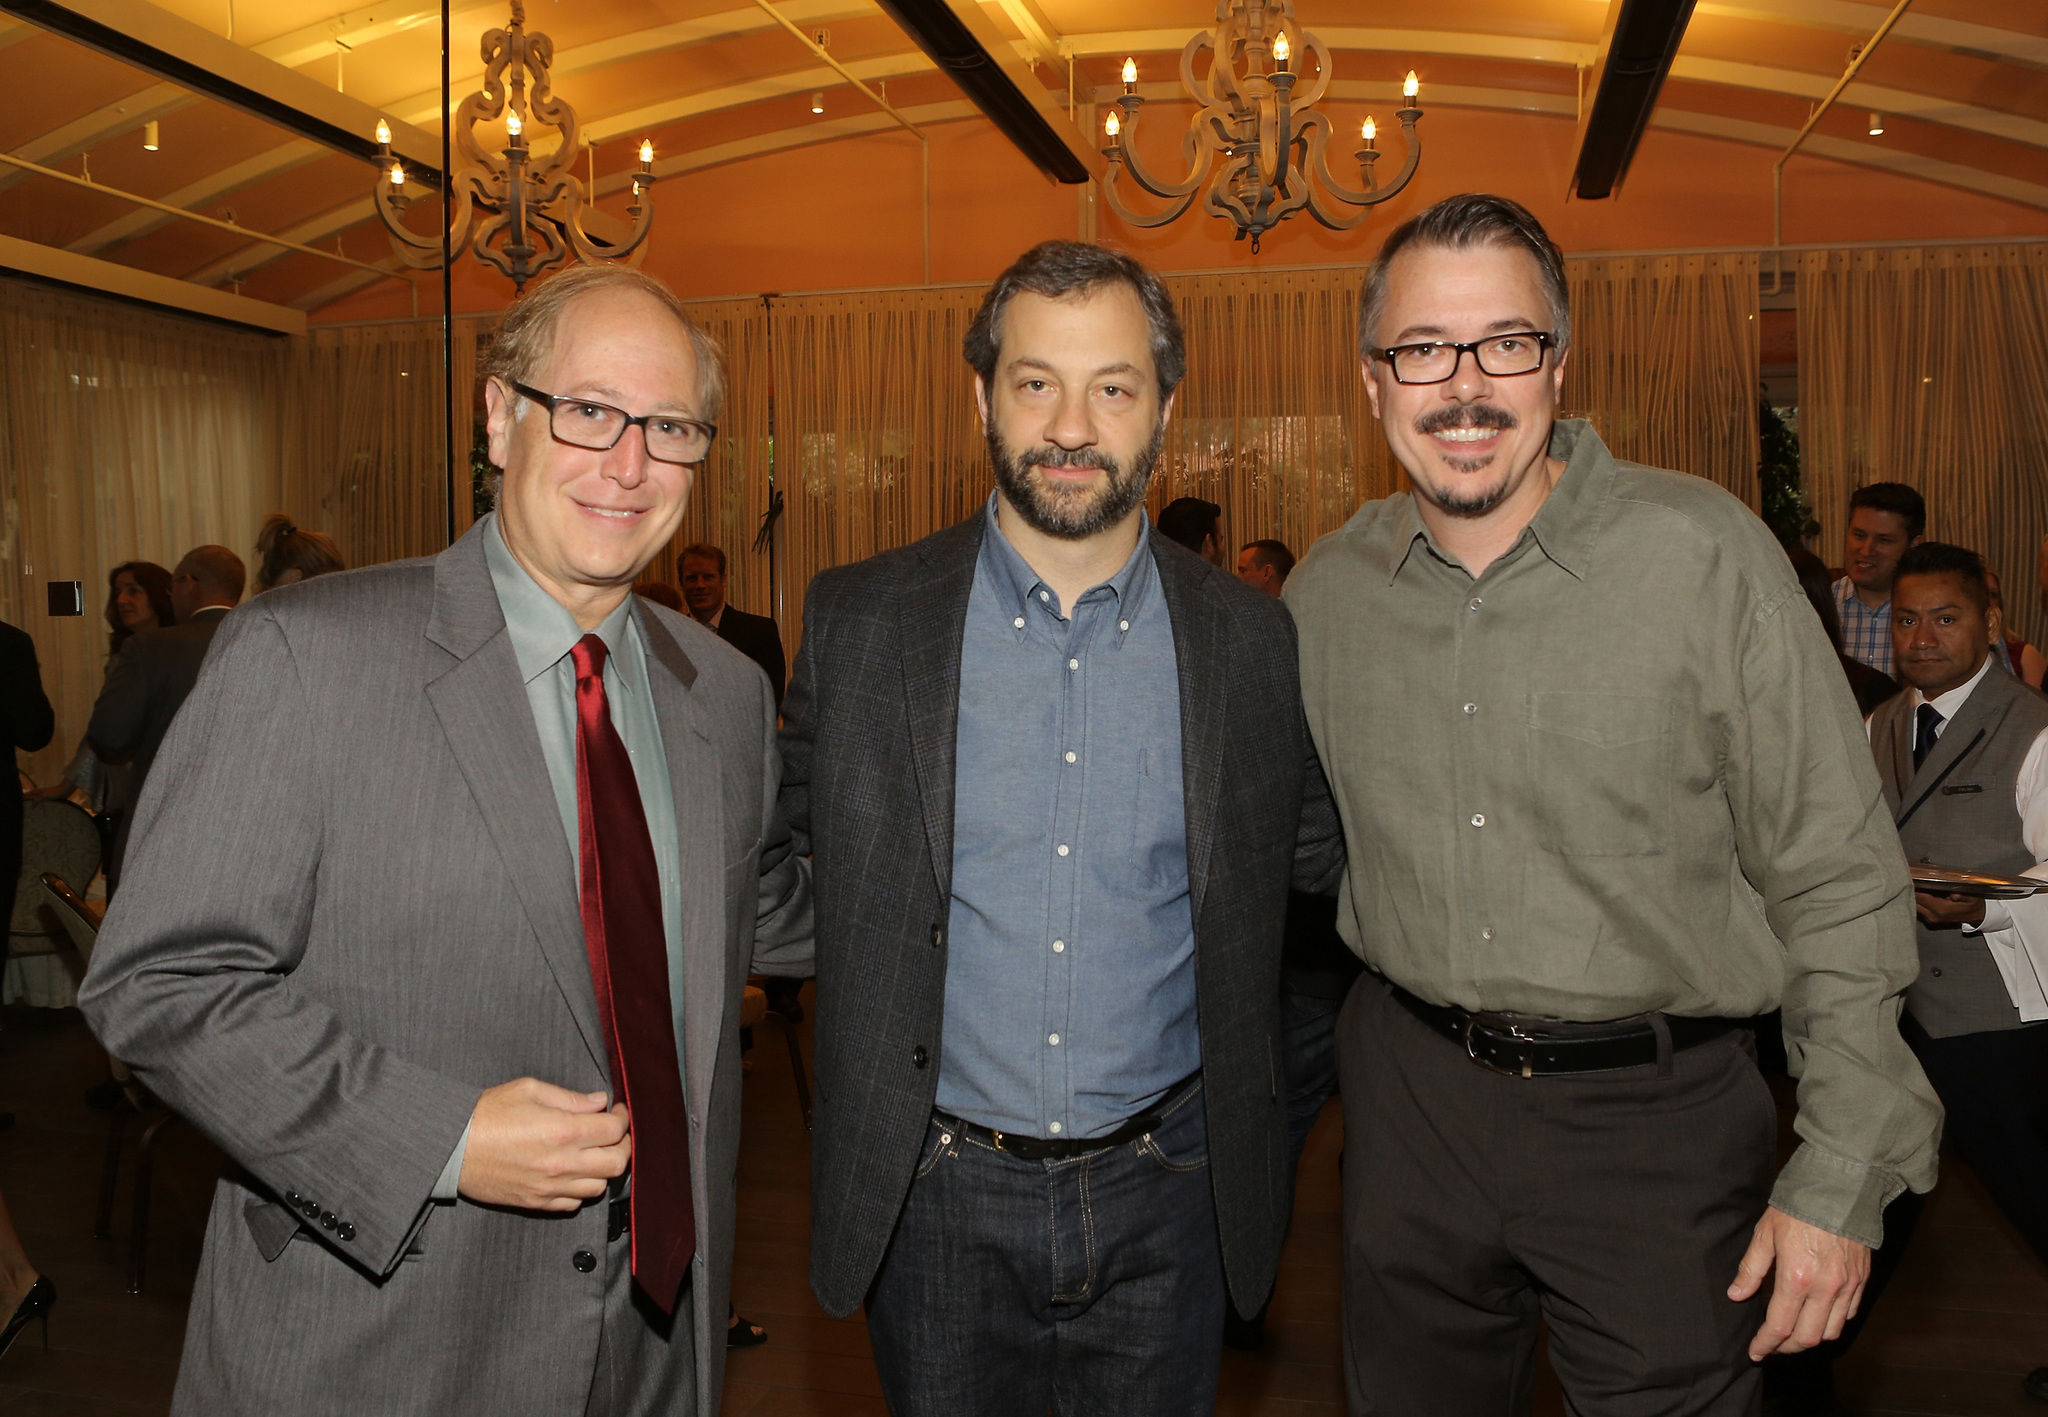 Judd Apatow, Vince Gilligan and Danny Zuker